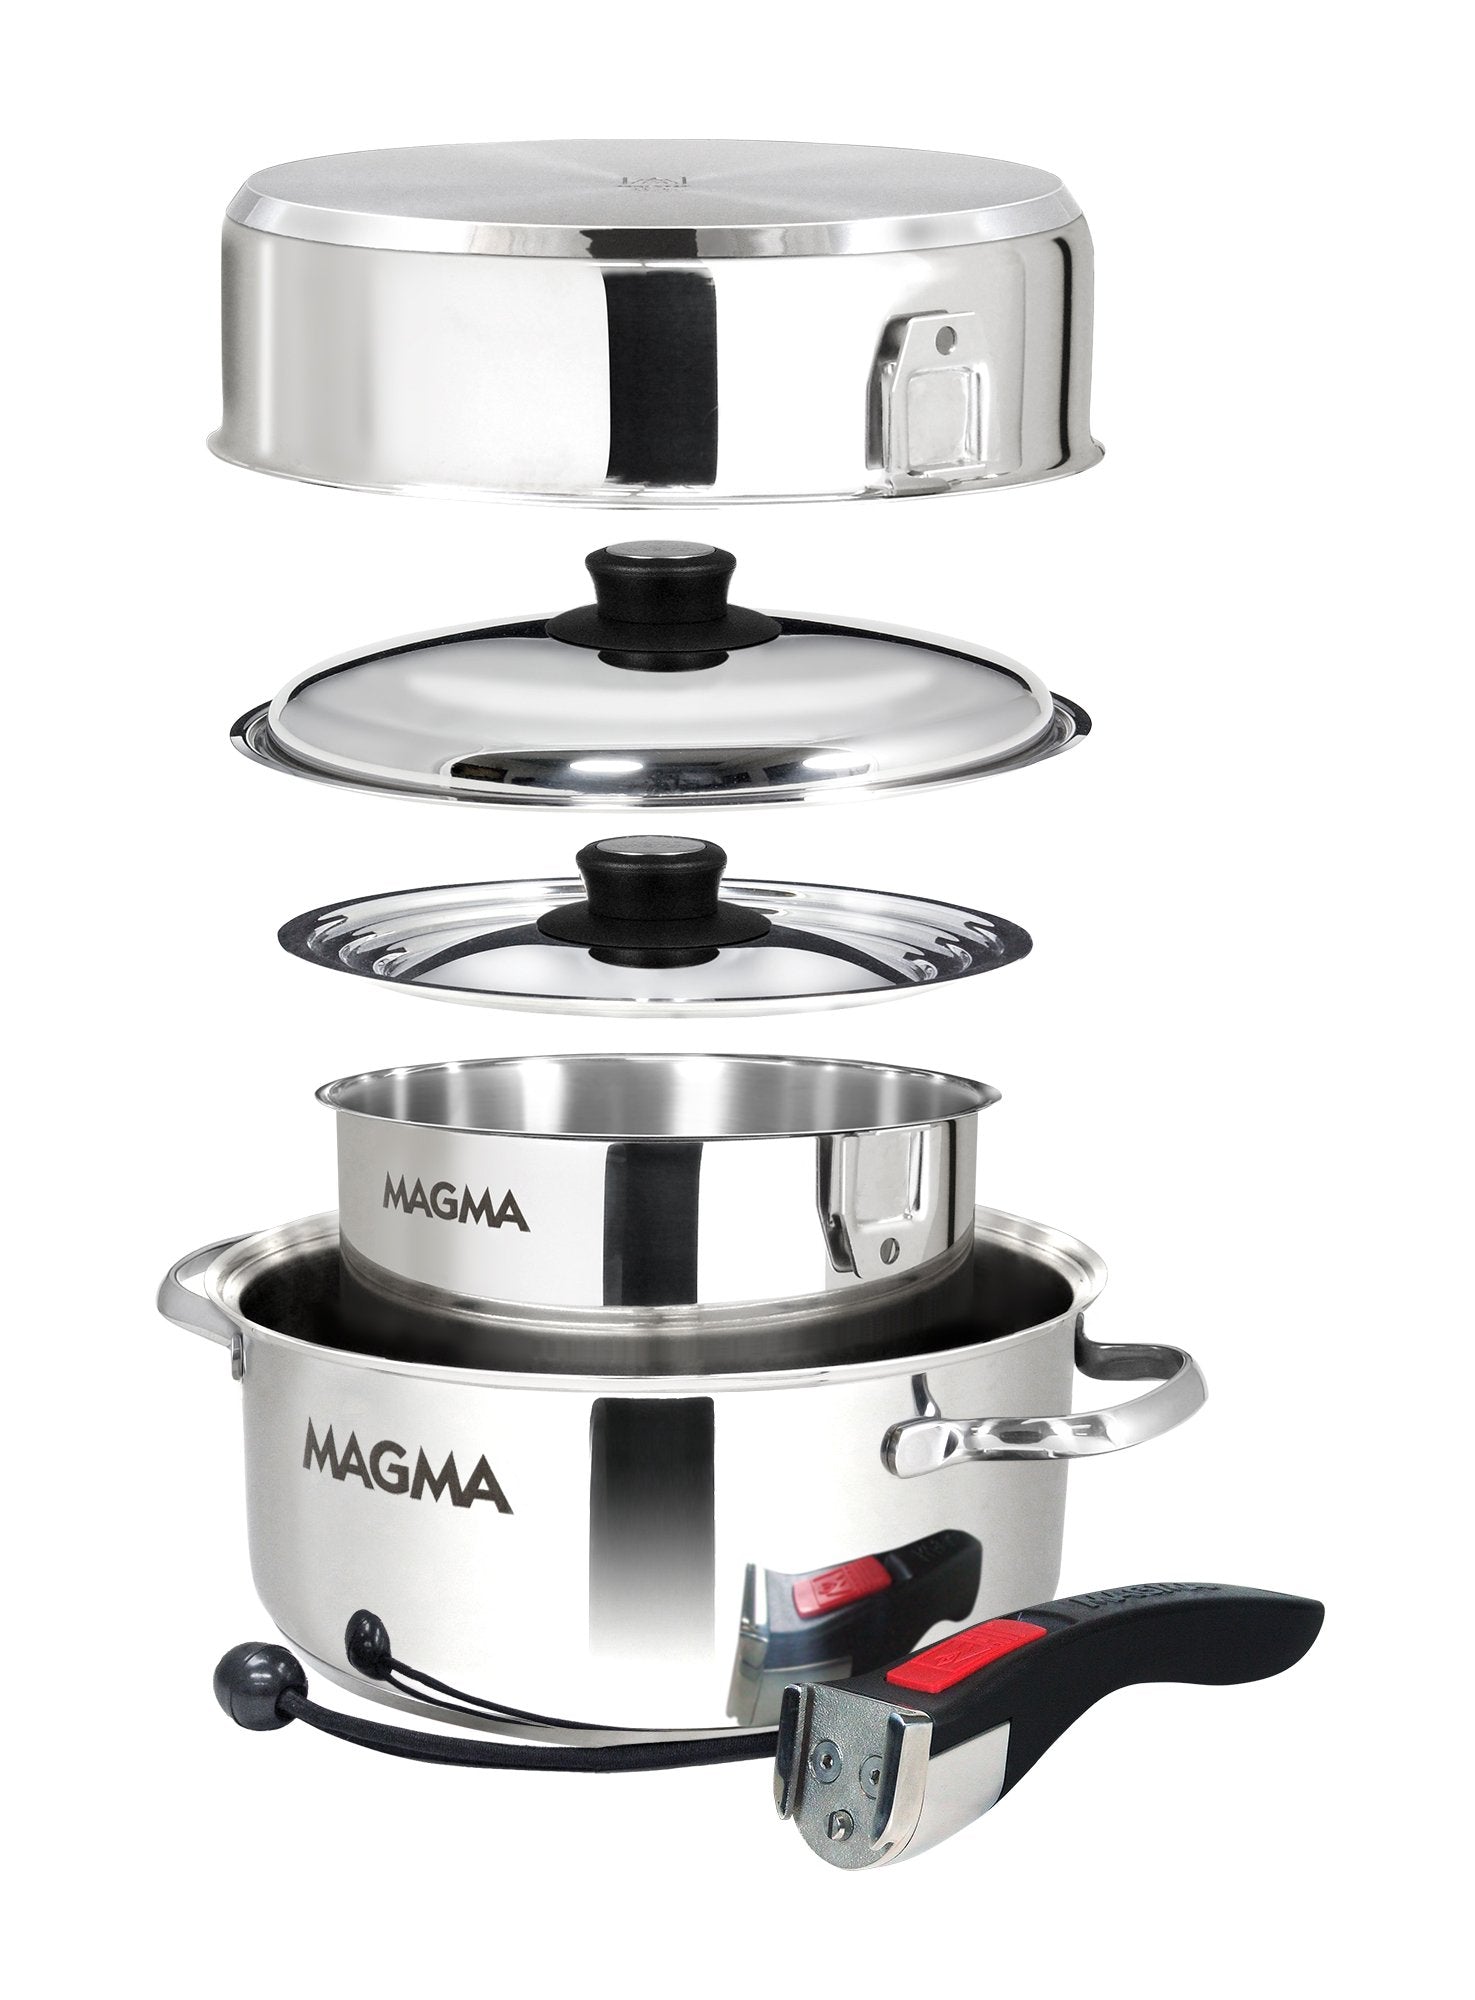 MAGMA Nesting Cookware for RVs and Boats: Product Review